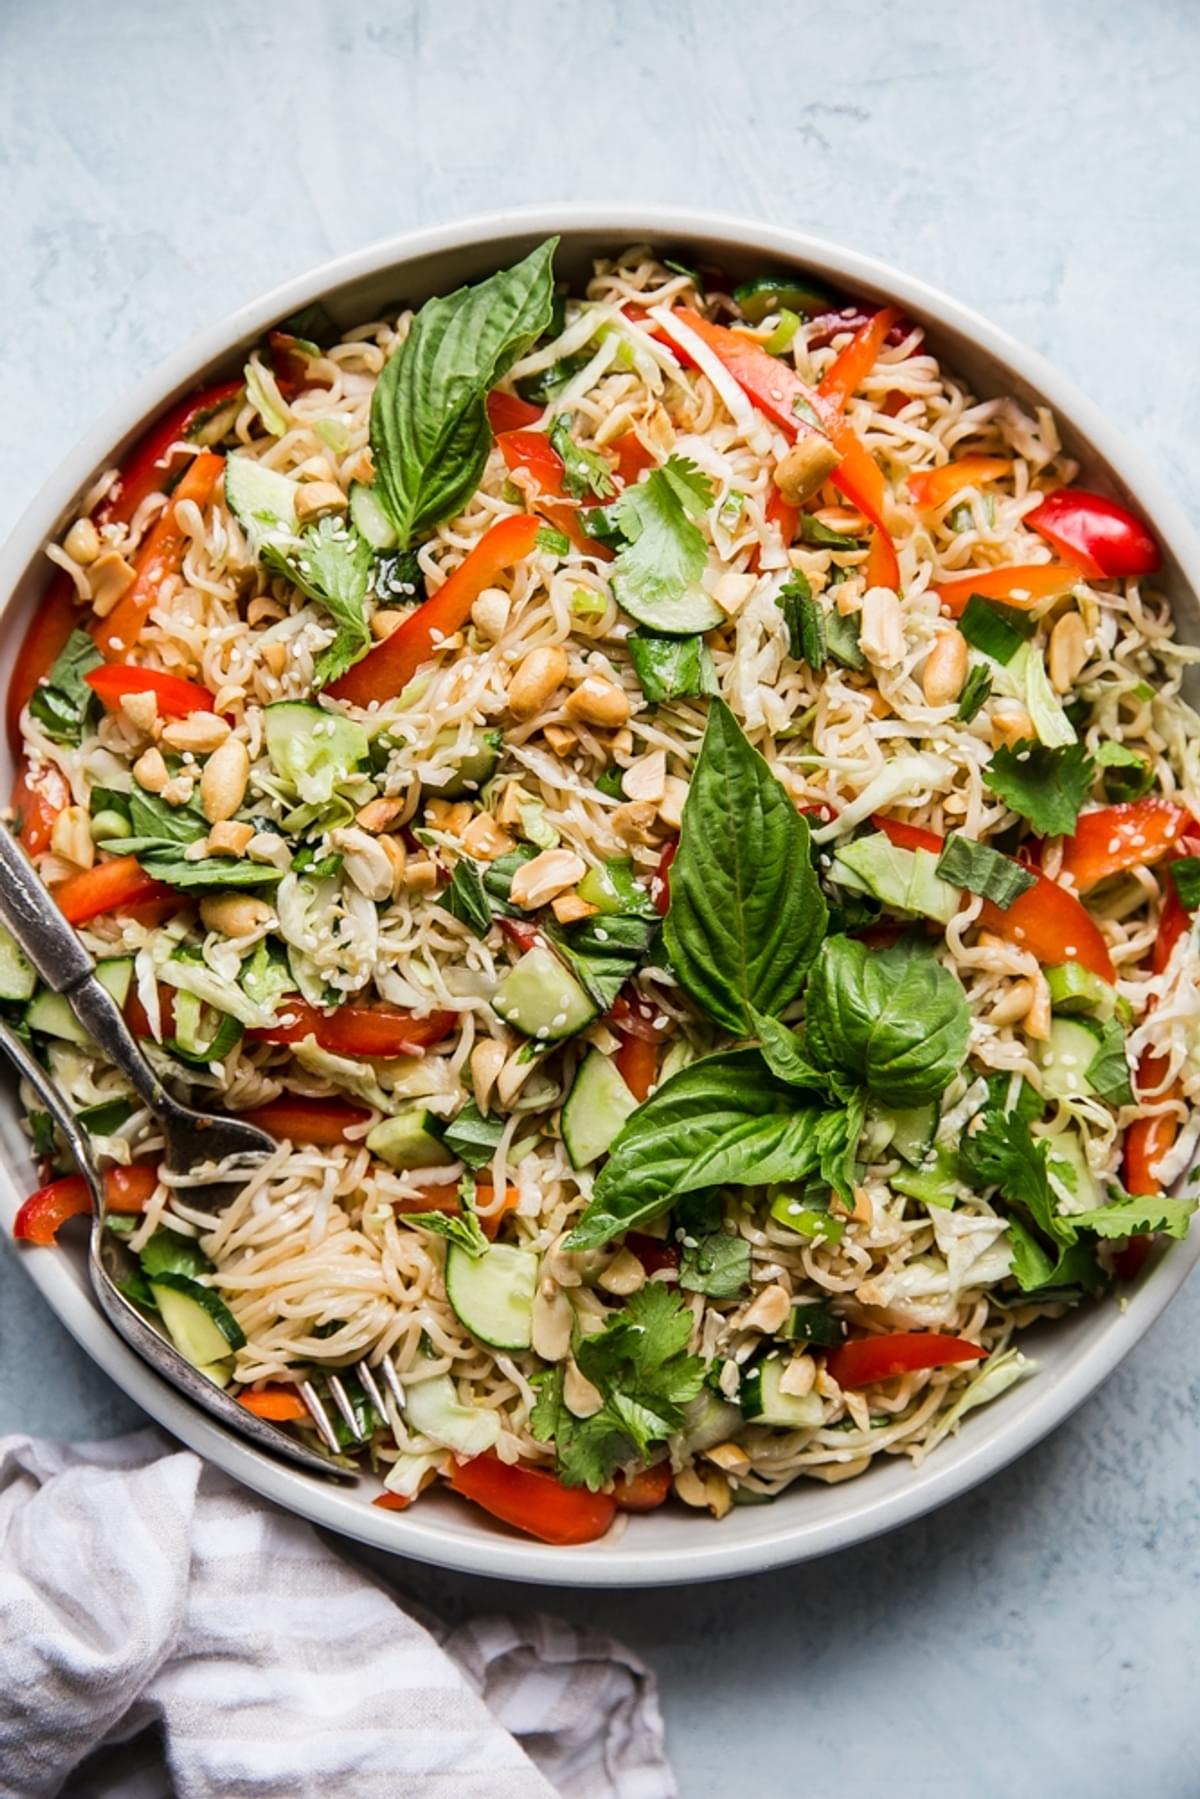 cold ramen salad in a bowl with basil, cucumbers, red bell peppers.